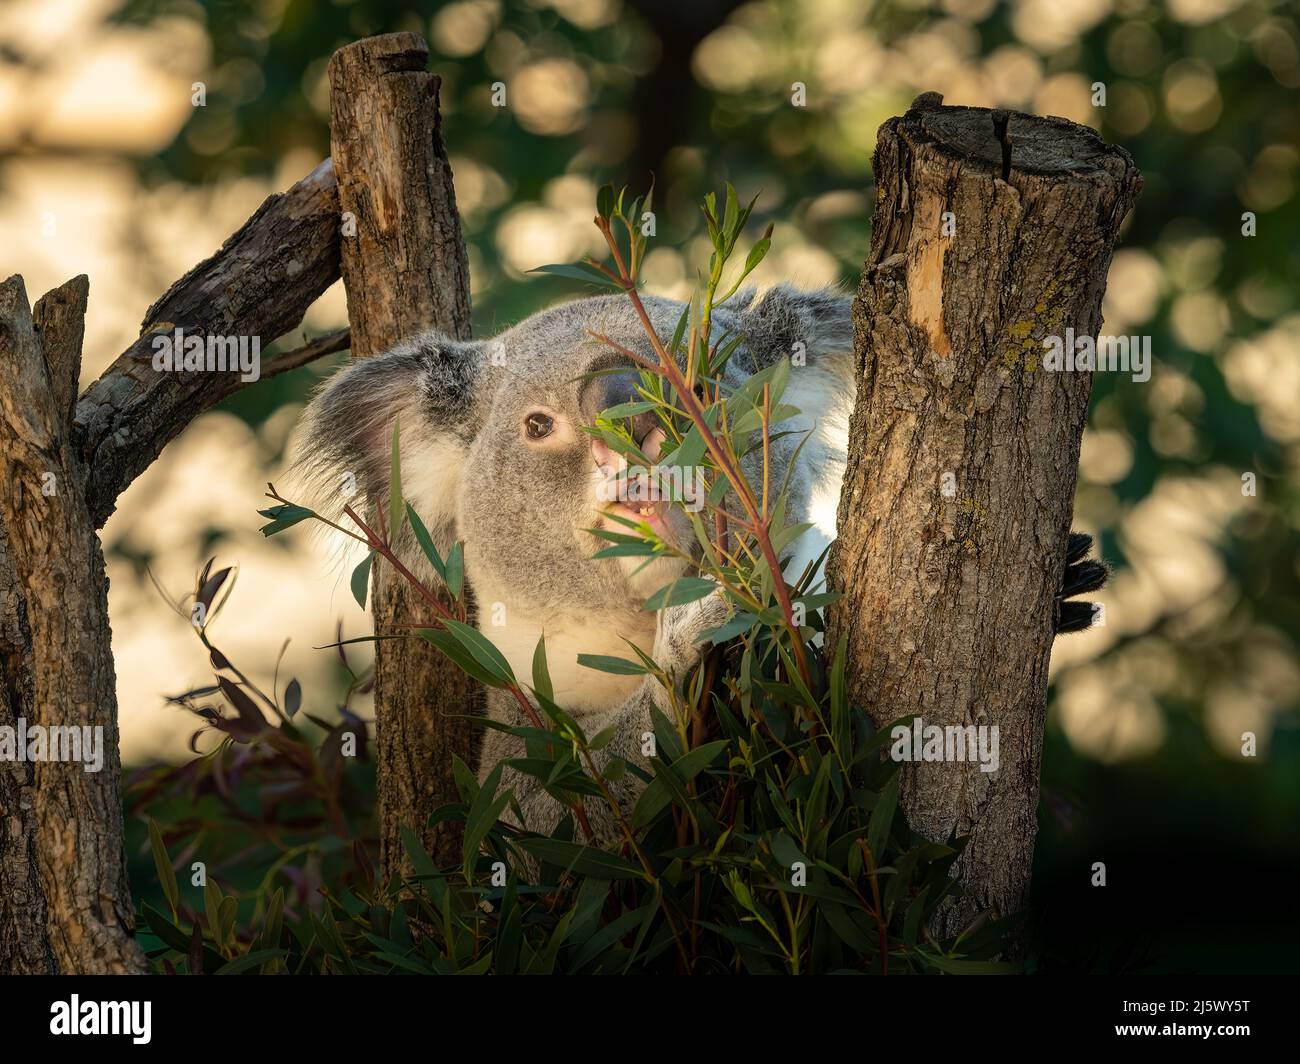 A cute little koala (Phascolarctos cinereus) sitting and eating on a tree in a zoo Stock Photo